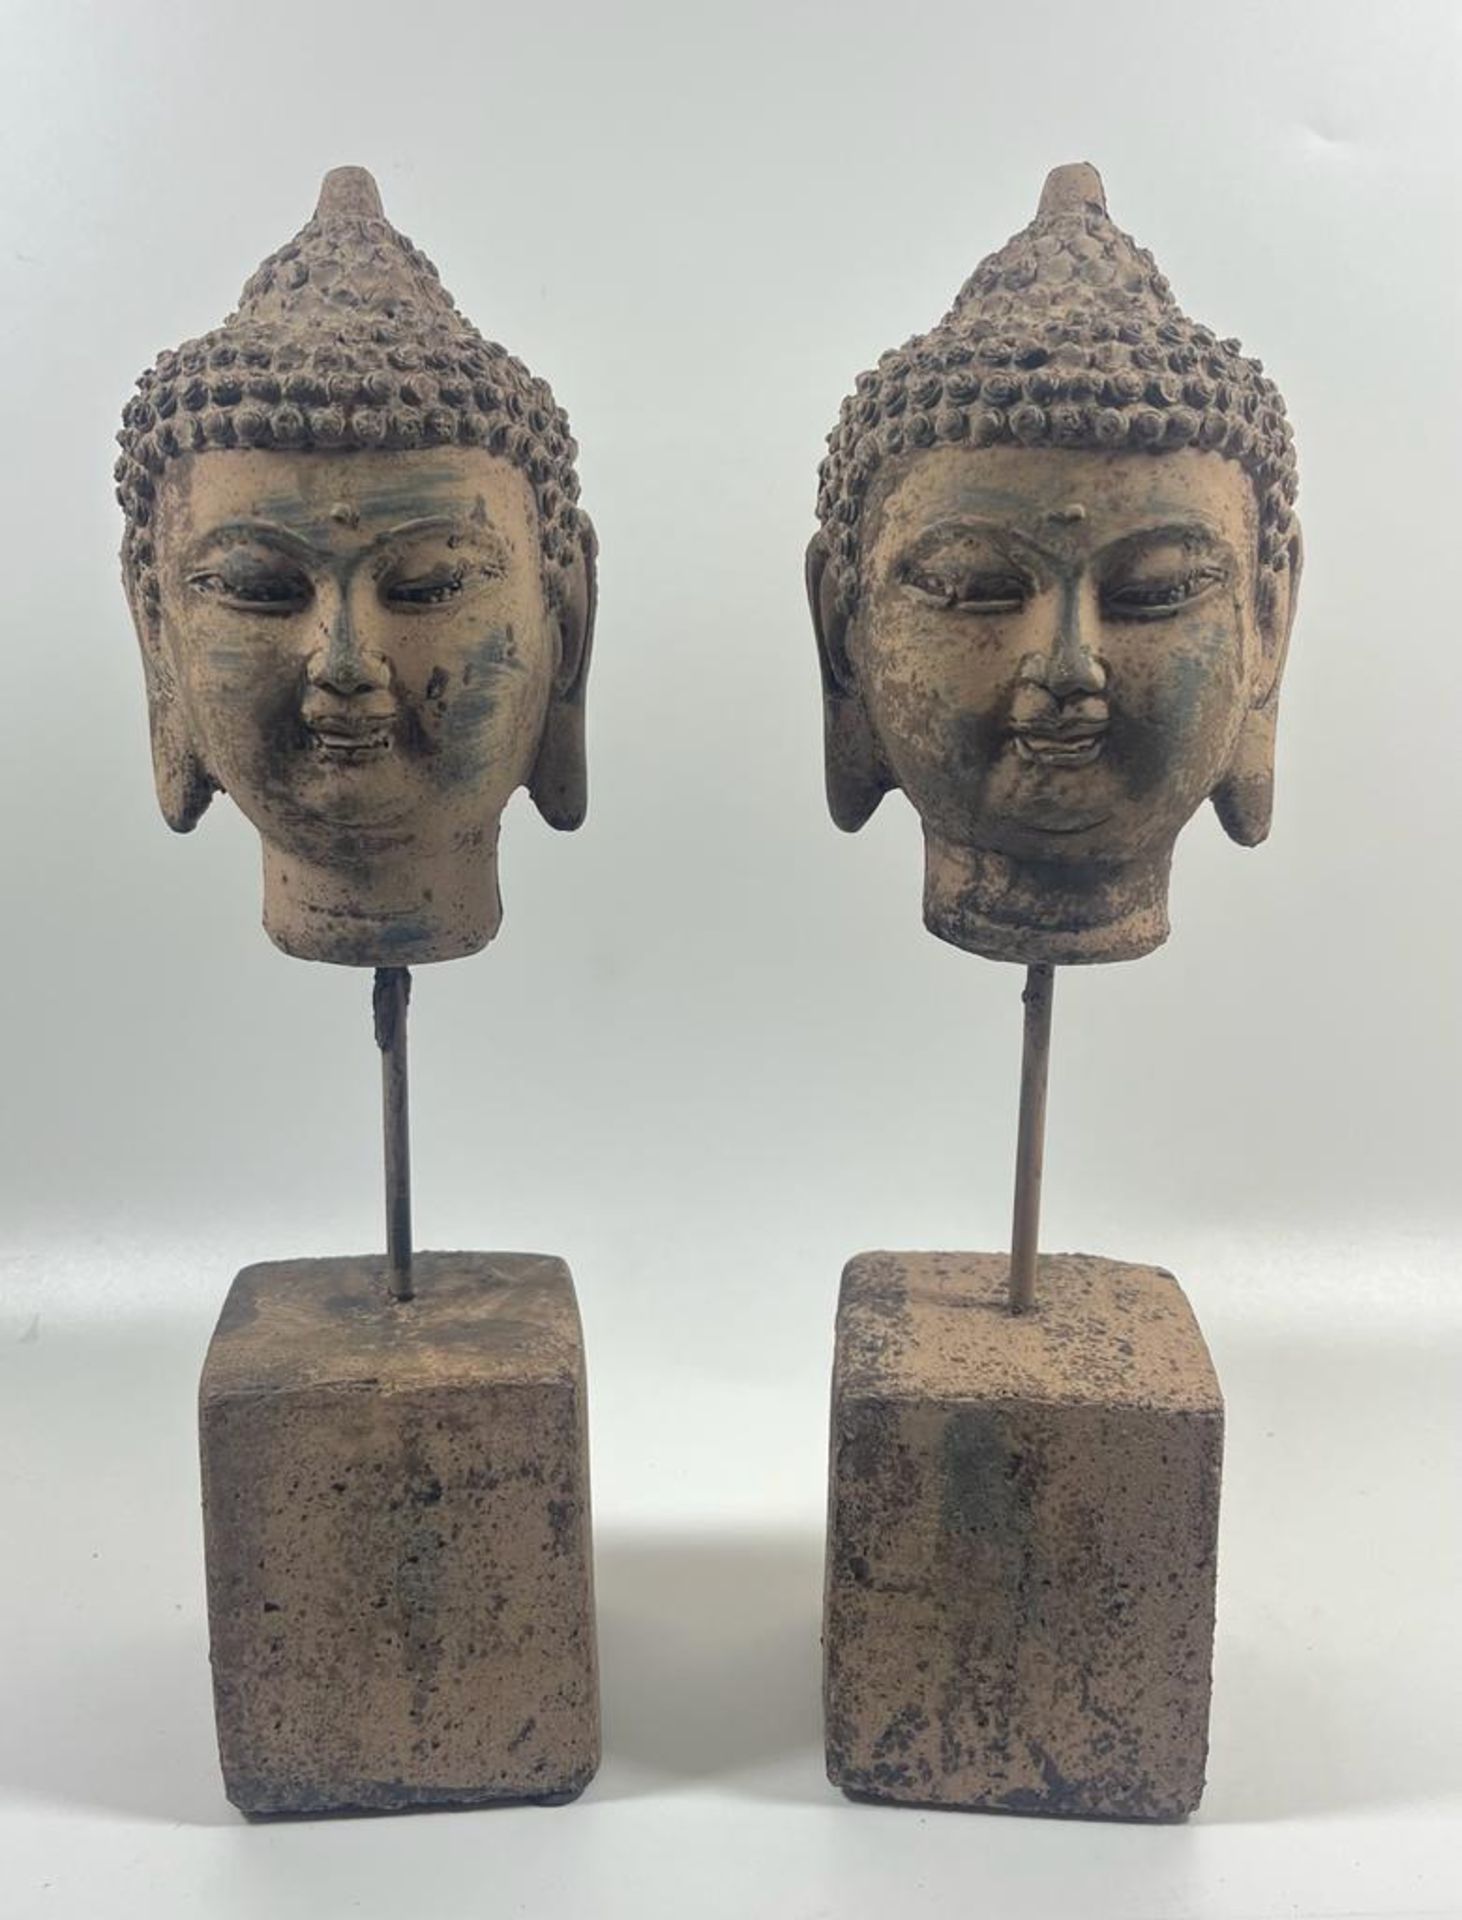 A PAIR OF DECORATIVE STONE BUDDHA HEADS ON PLINTH BASES, HEIGHT 30 CM